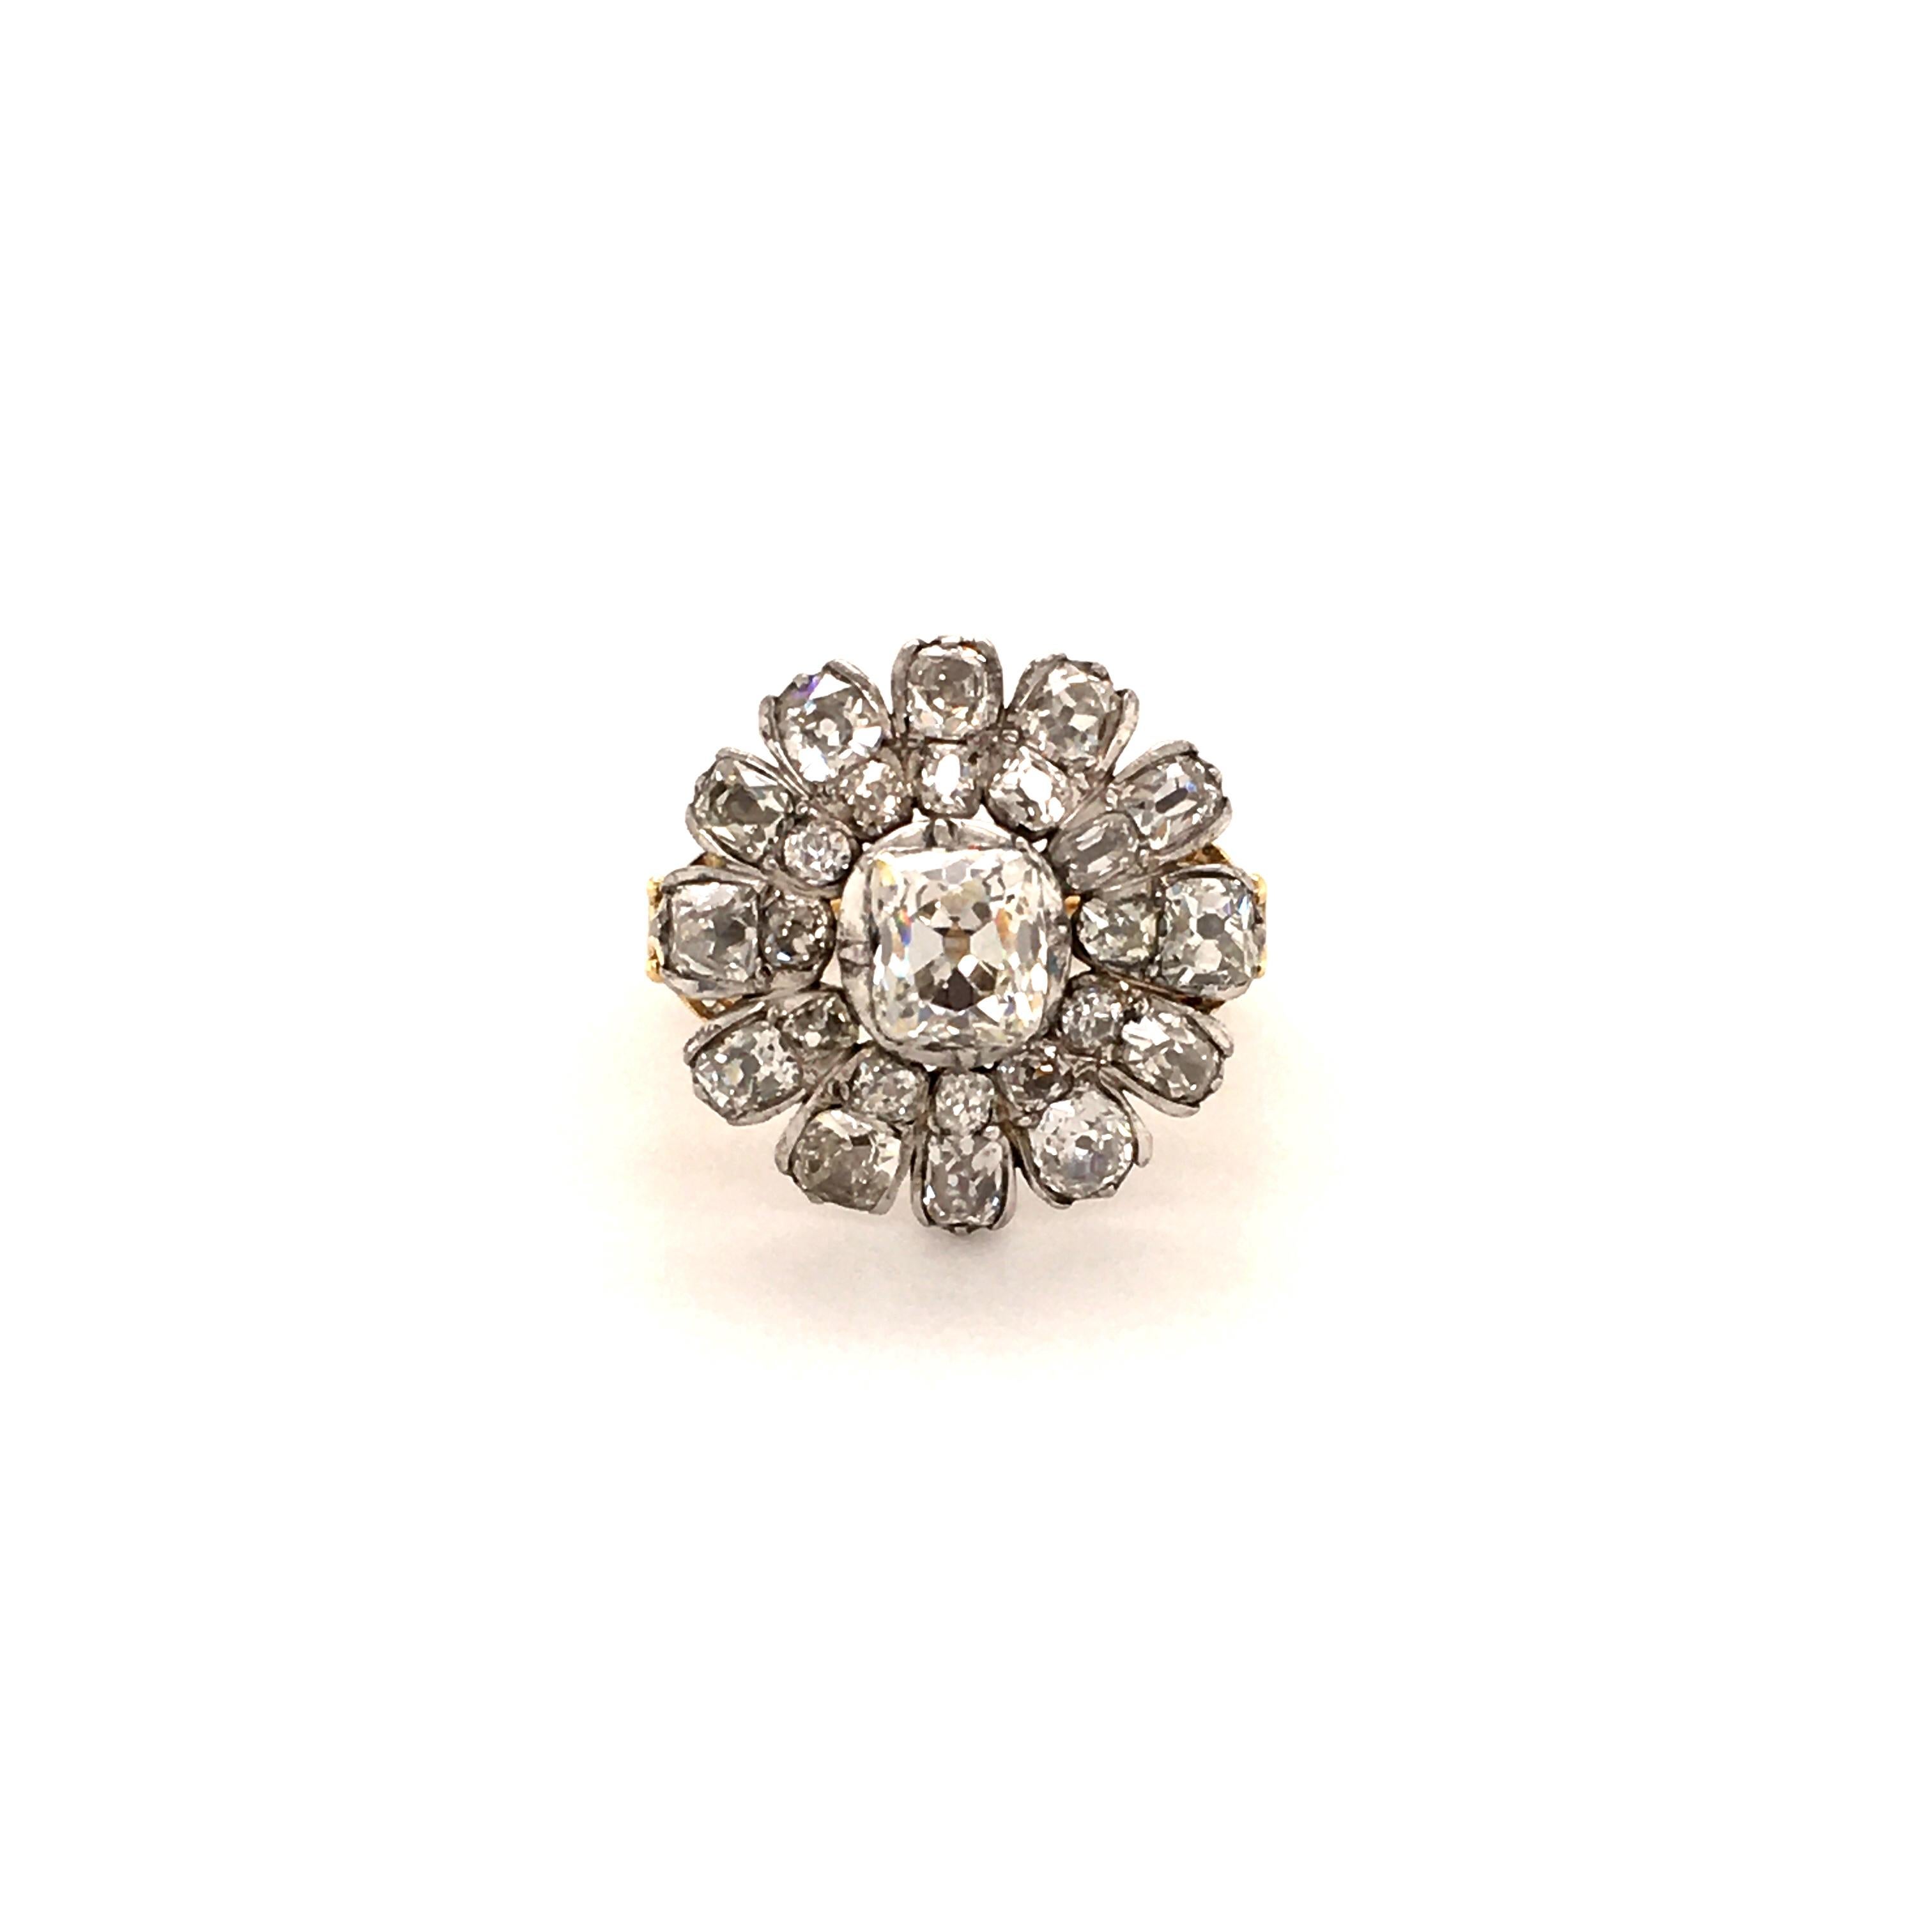 This enchanting flower ring is set with a beautiful cushion-shaped old-cut diamond of 0.90 ct and J-si2 quality.
Double entourage with 24 old cut diamonds in various shapes totalling around 2.20 ct of K/L-si quality.
Top of the ring manufactured in